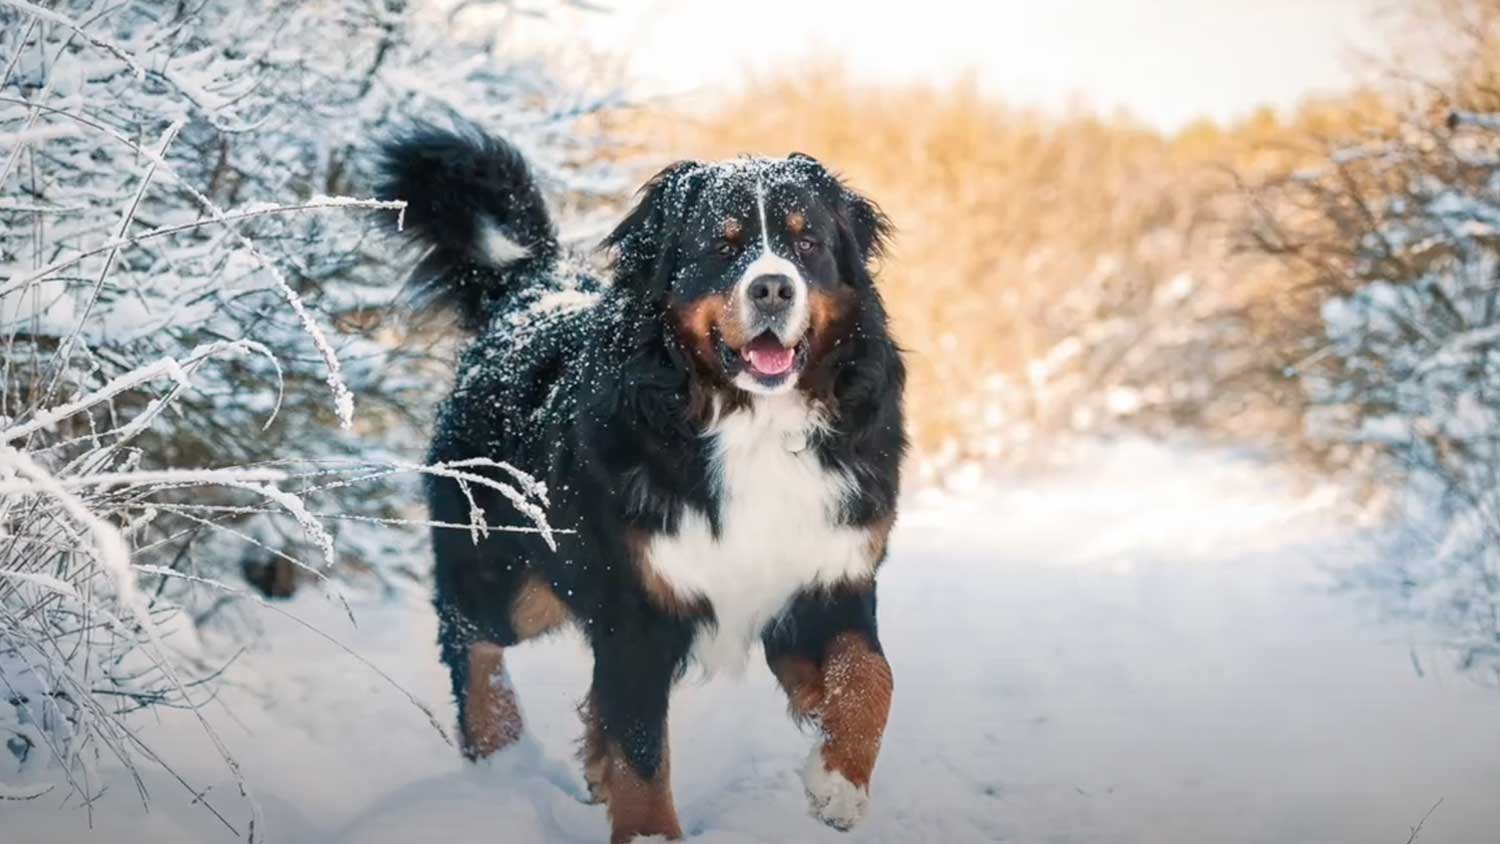 Bernese Mountain Dog playing in the snow